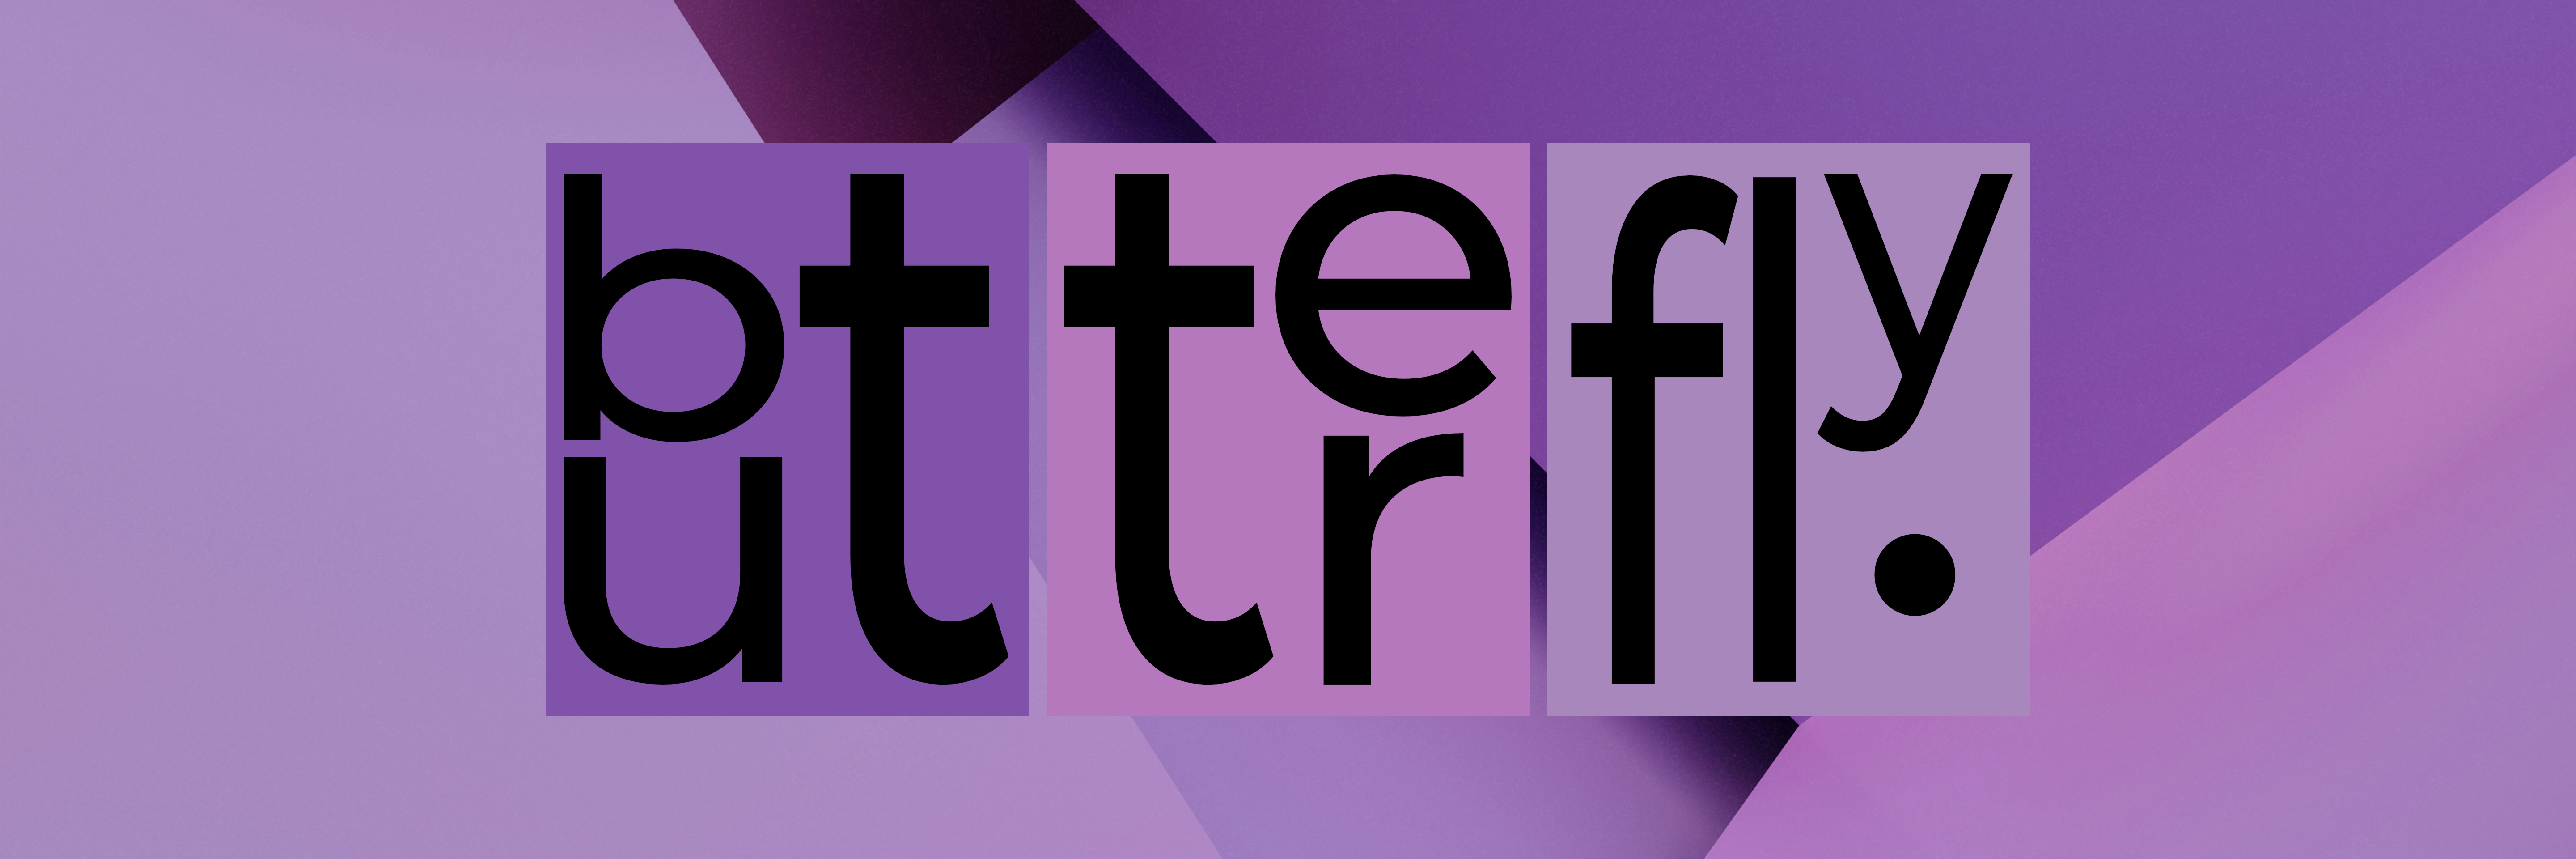 butterfly shown as syllable blocks